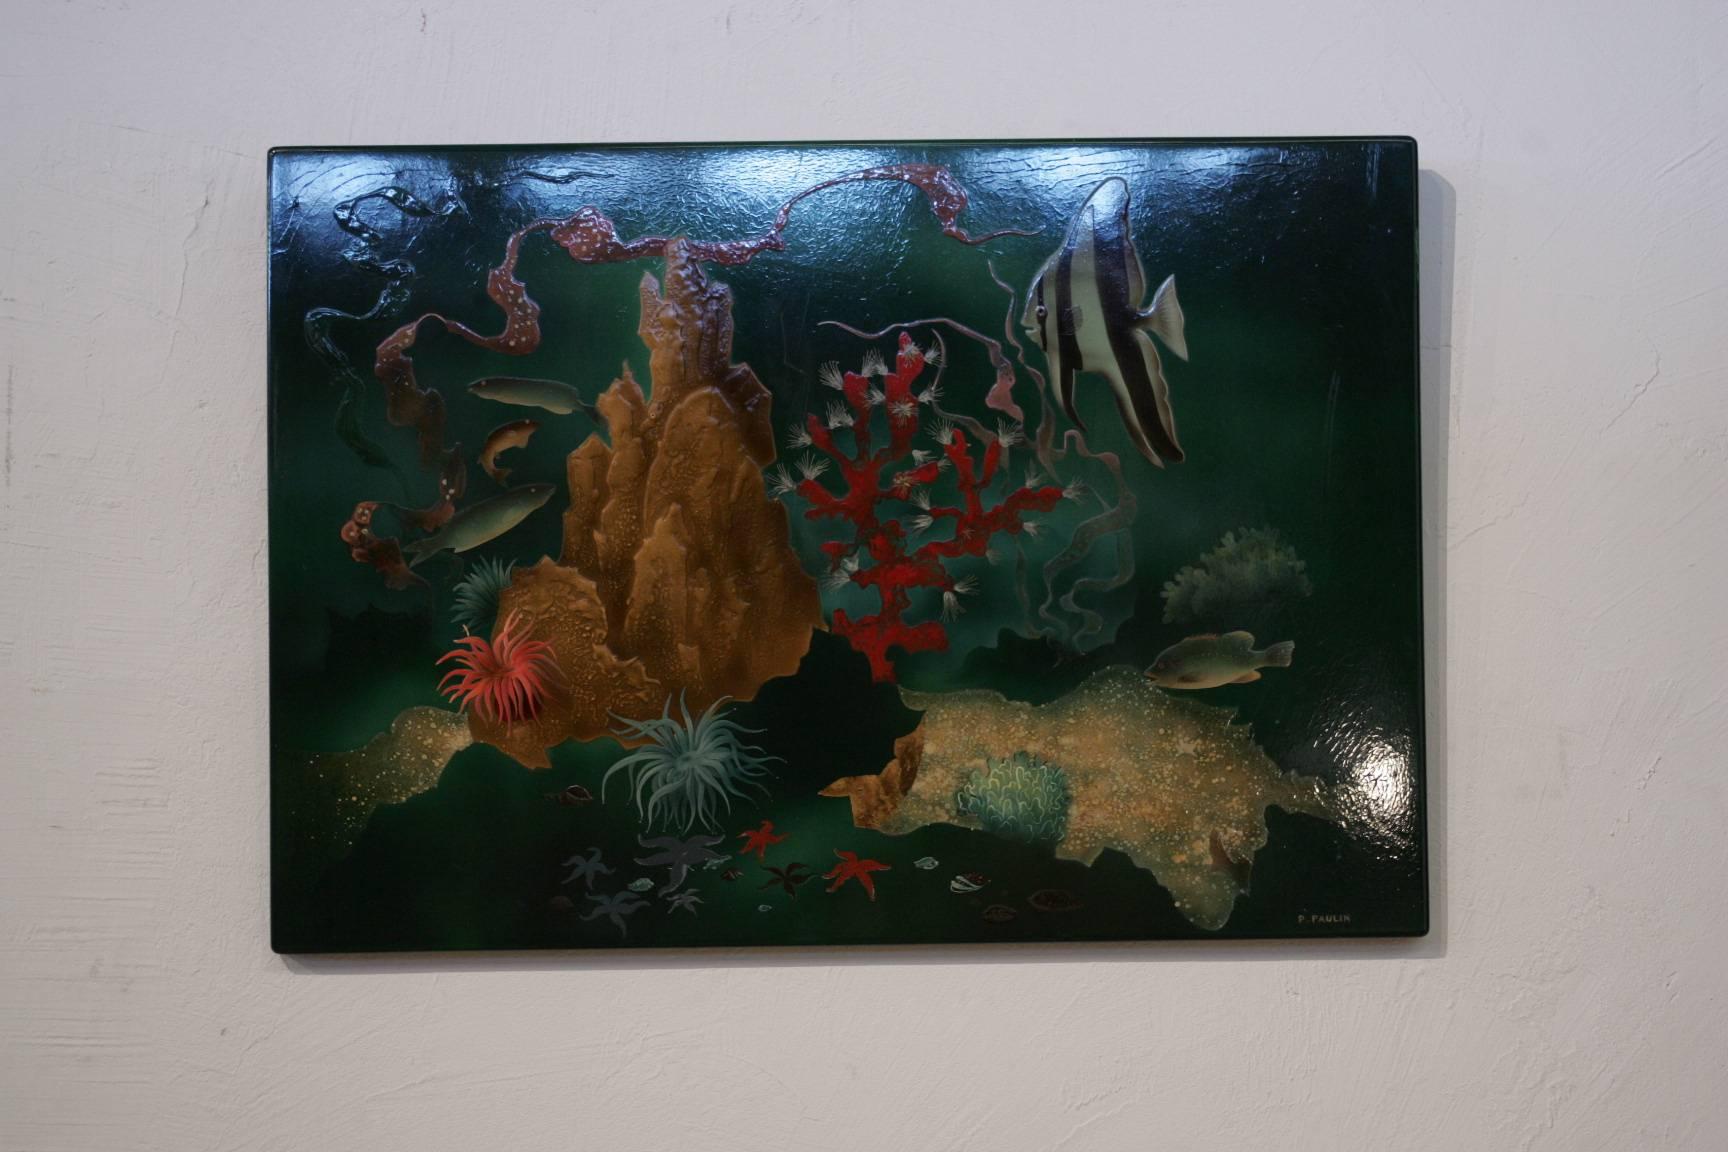 An aquarium lacquered wood panel by Pierre Paulin French Art Deco artist from Lyon in very good condition.